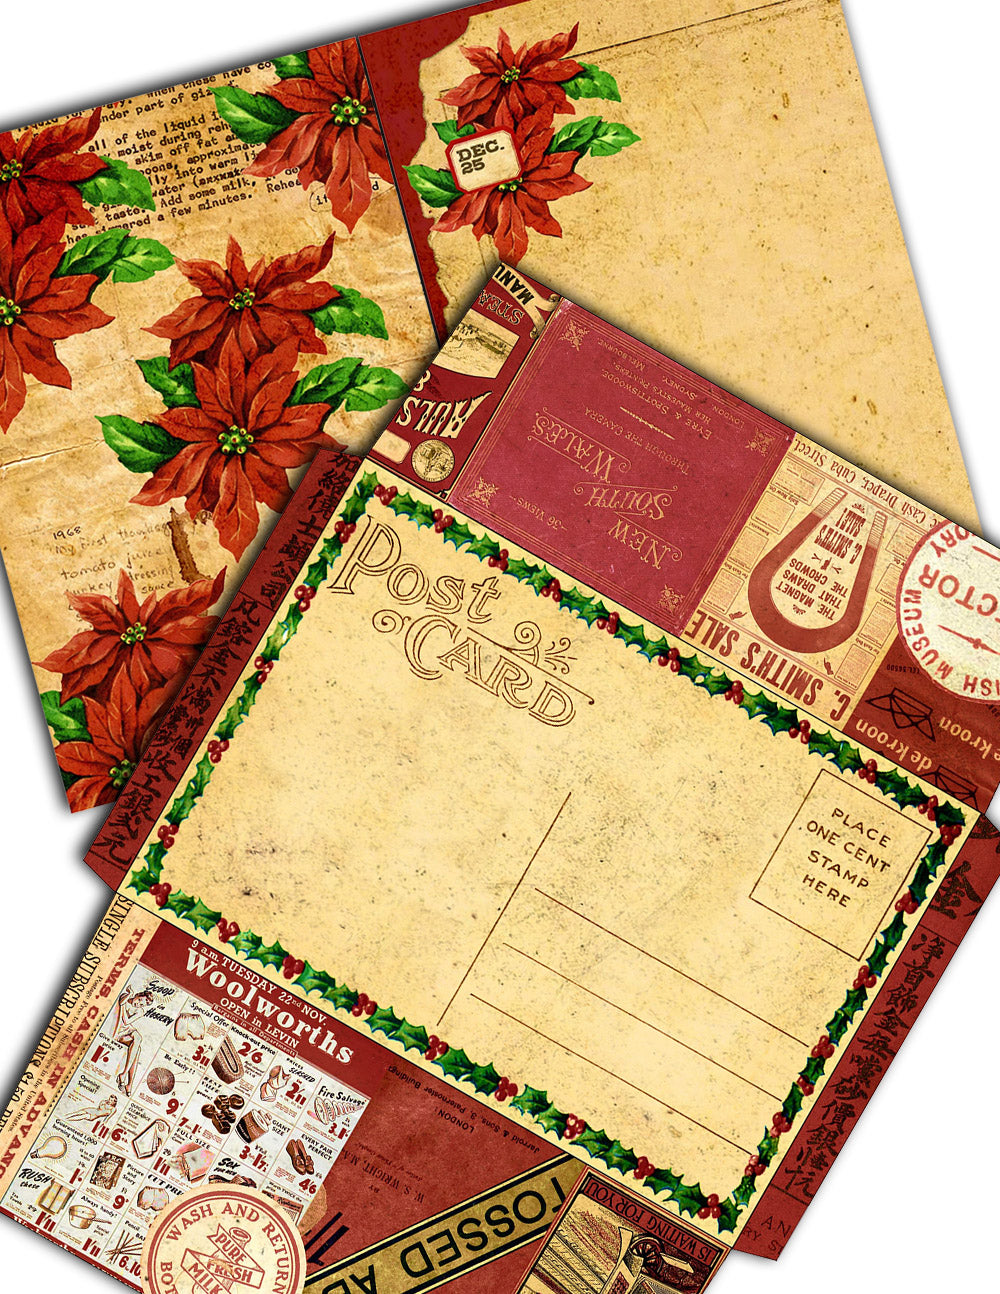 Travelers Notebook - Christmas List Journal Pages - 30 Printable Midori Insert Pages- travellers notebook, fauxdori insert, junk journal kit